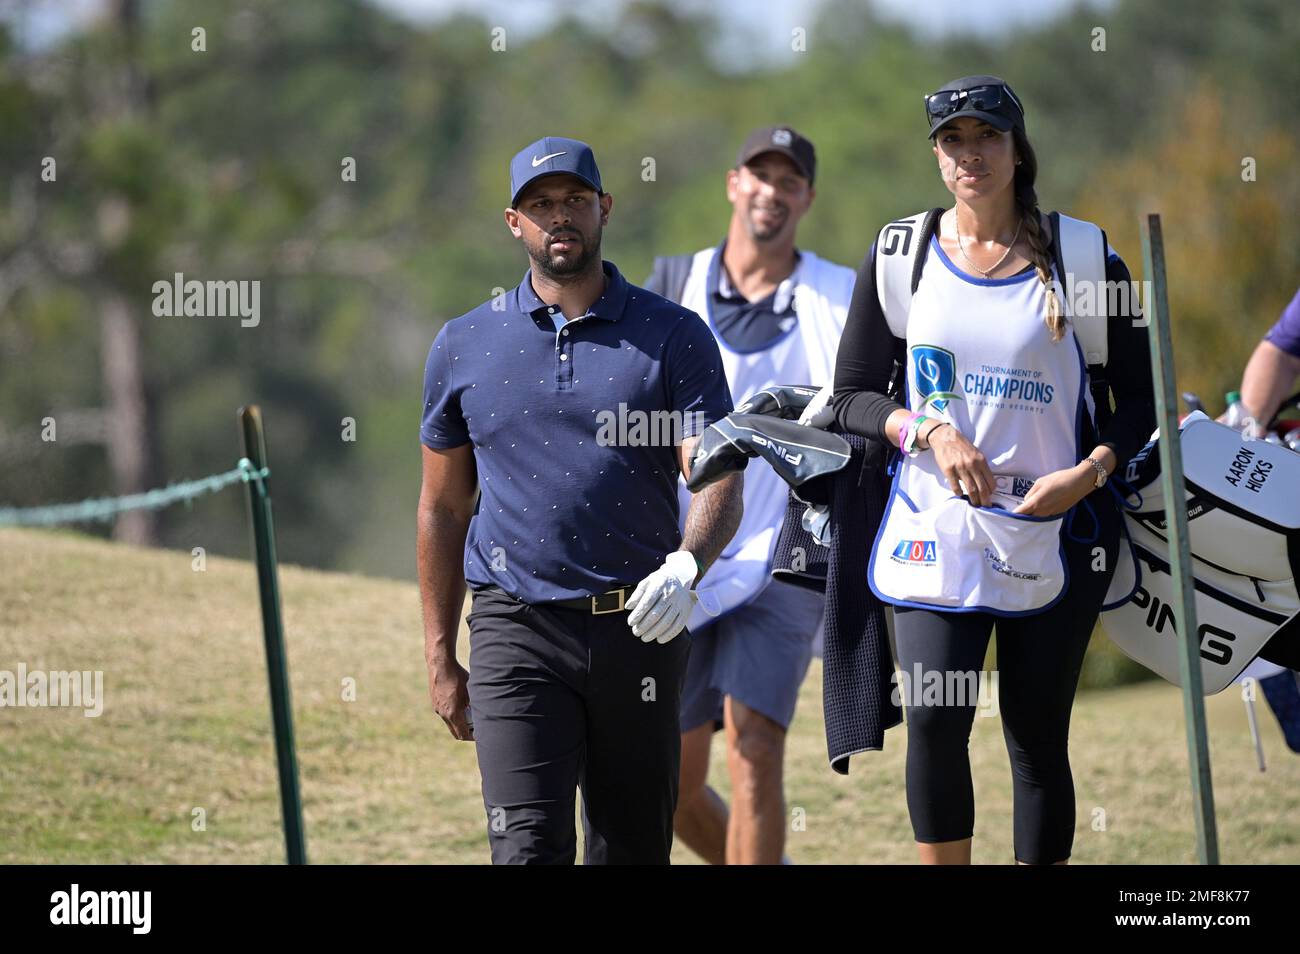 Professional baseball player Aaron Hicks, right, and his caddie Cheyenne  Woods, niece of golfer Tiger Woods, wait at the 17th tee during the final  round of the Tournament of Champions LPGA golf